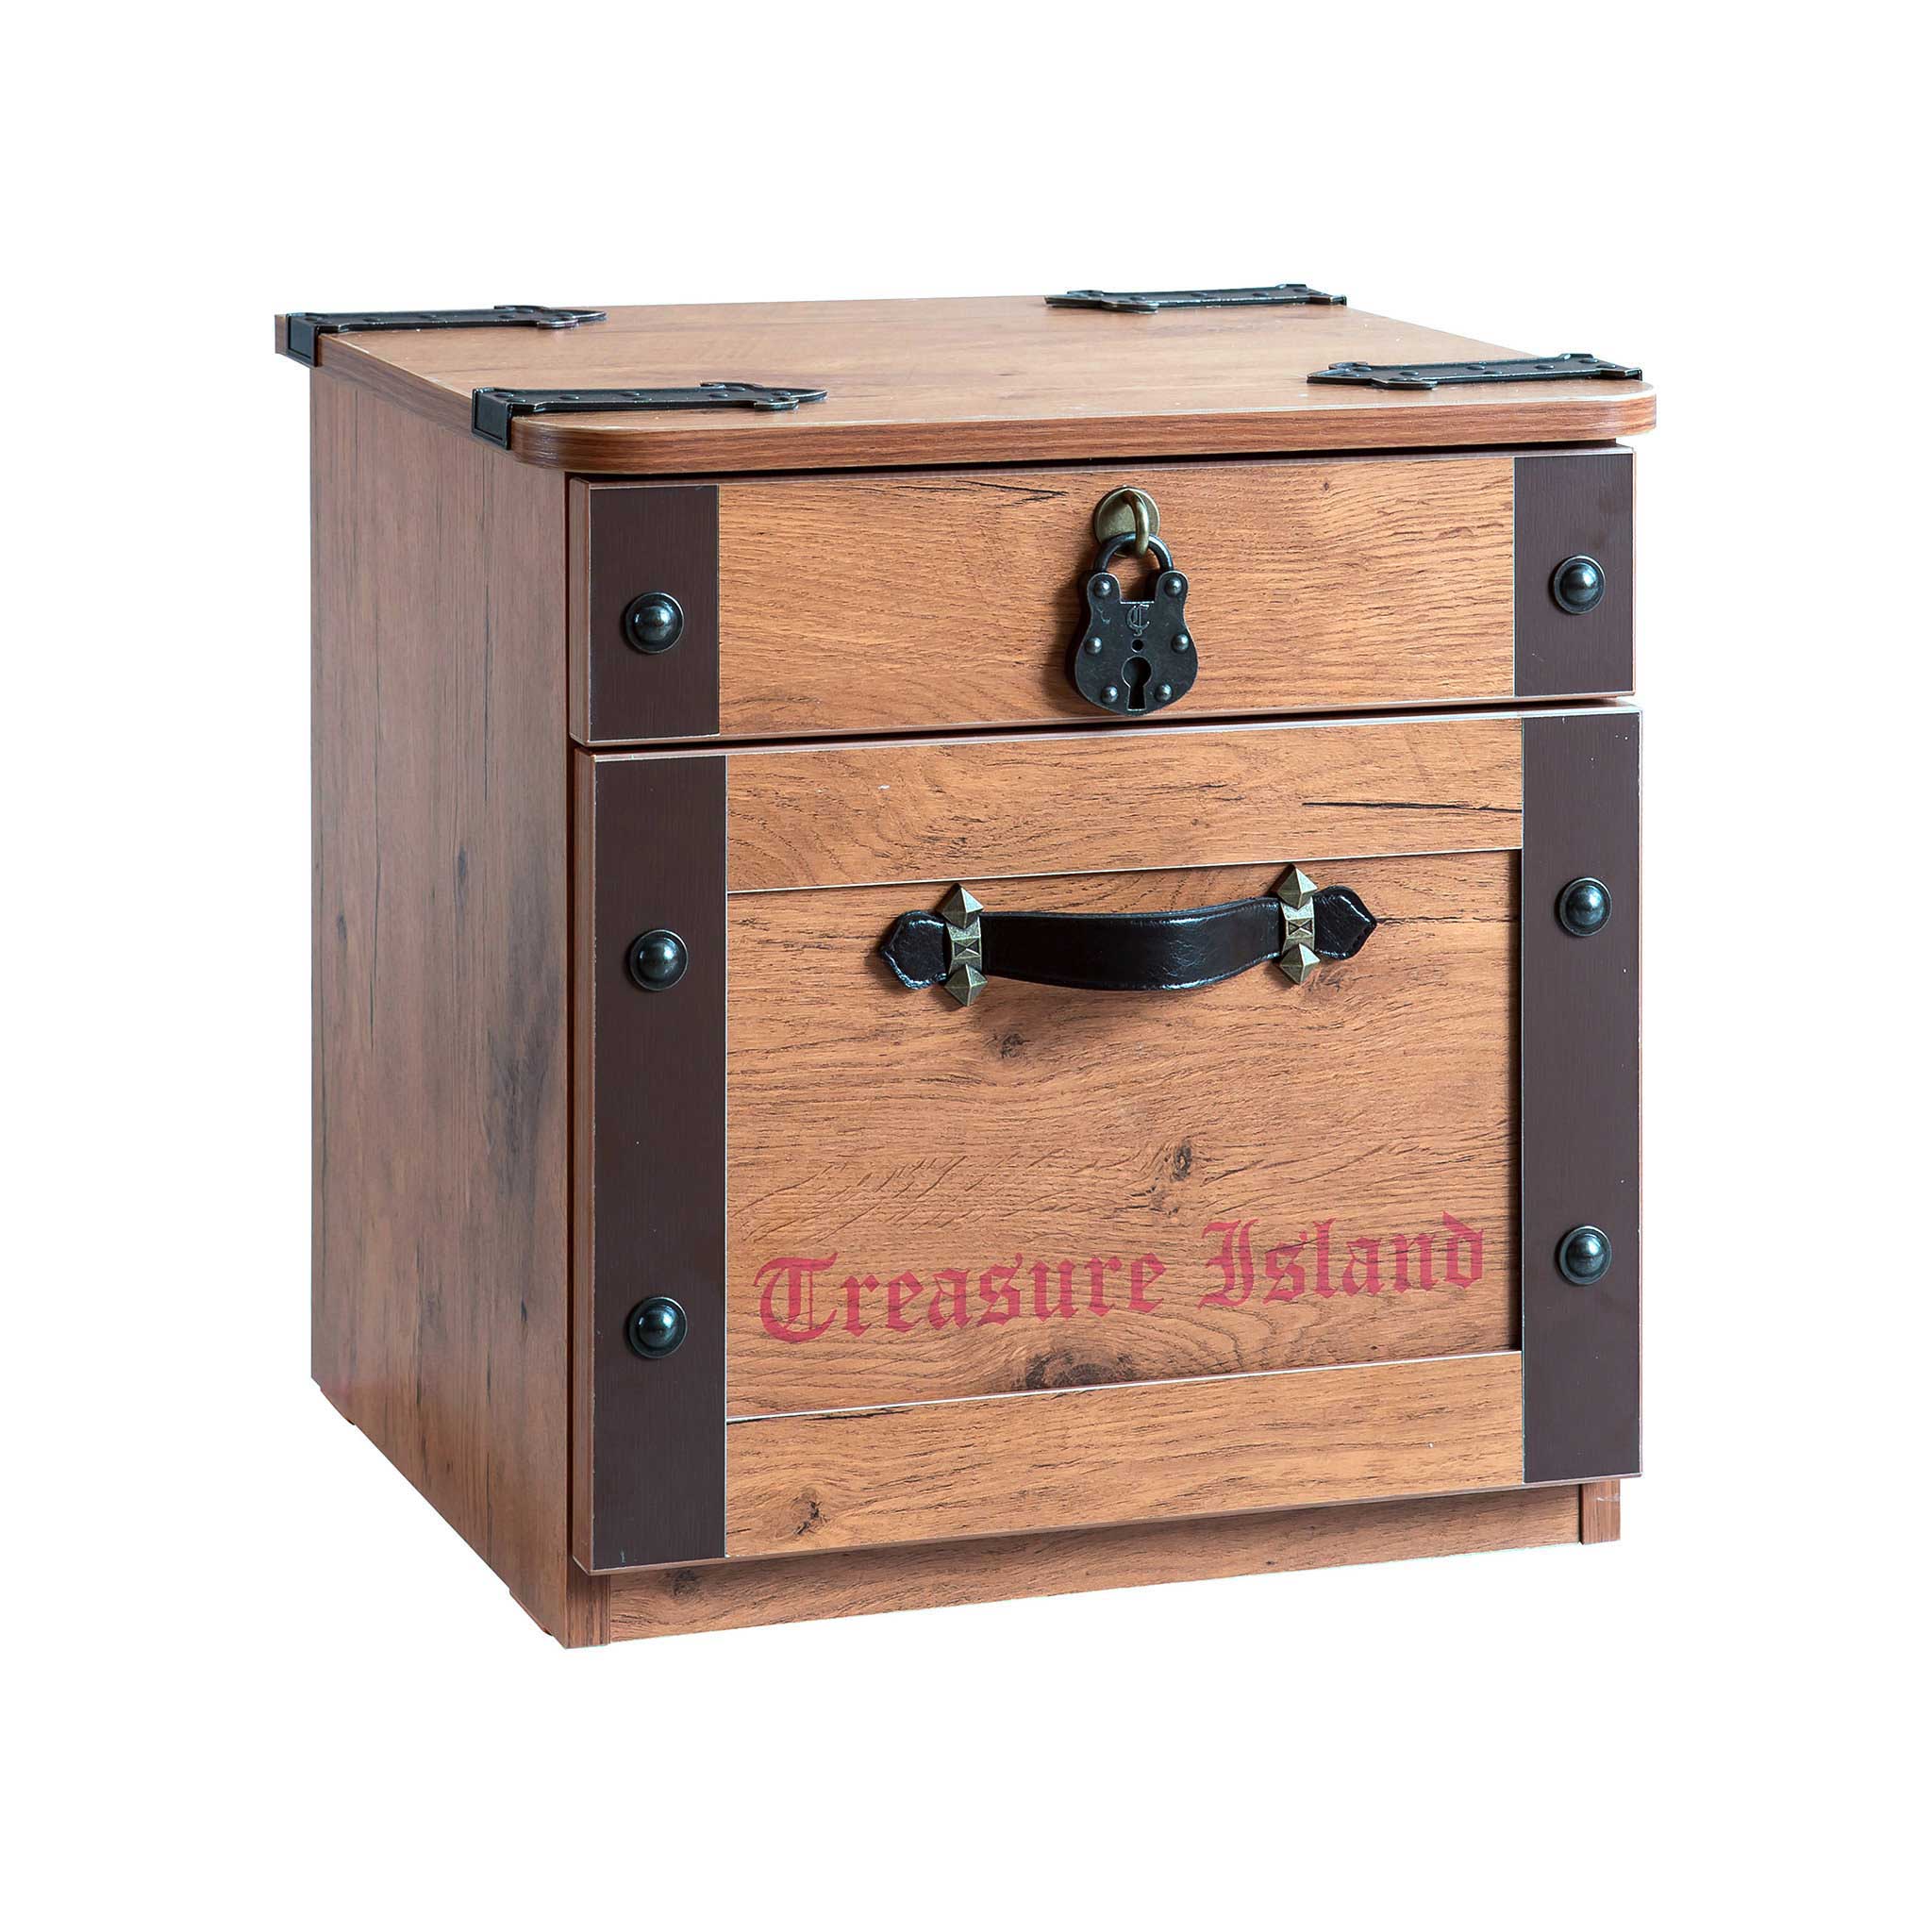 Pirate Nightstand with 2 Drawers and Leatherette Handles